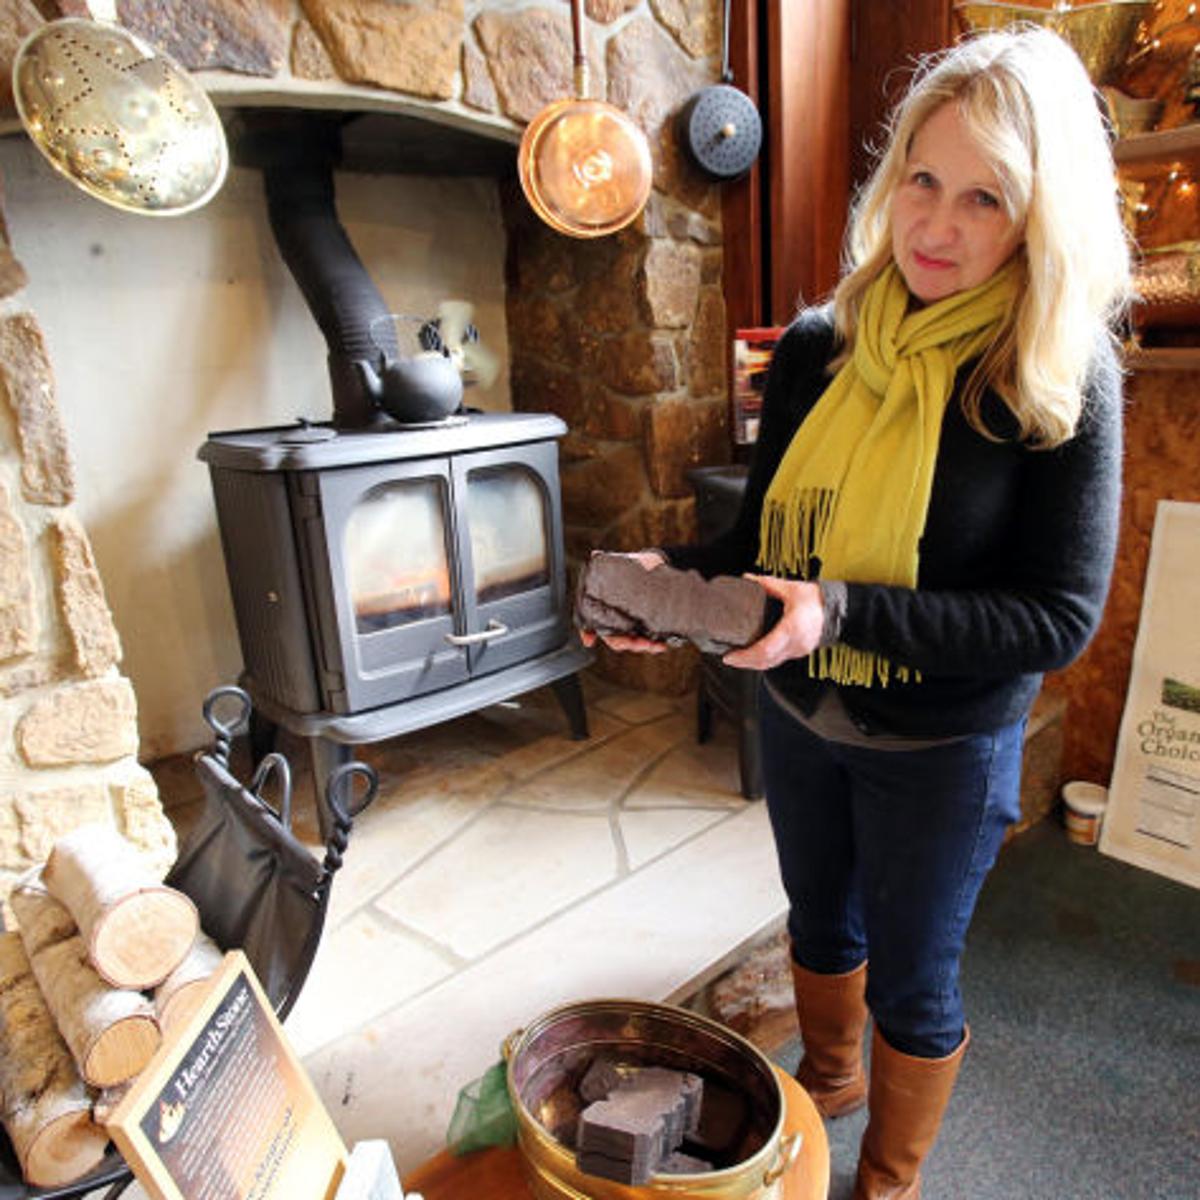 Local Fireplace Stores Fresh Endless Winter Boon for south Jersey Fireplace Stores